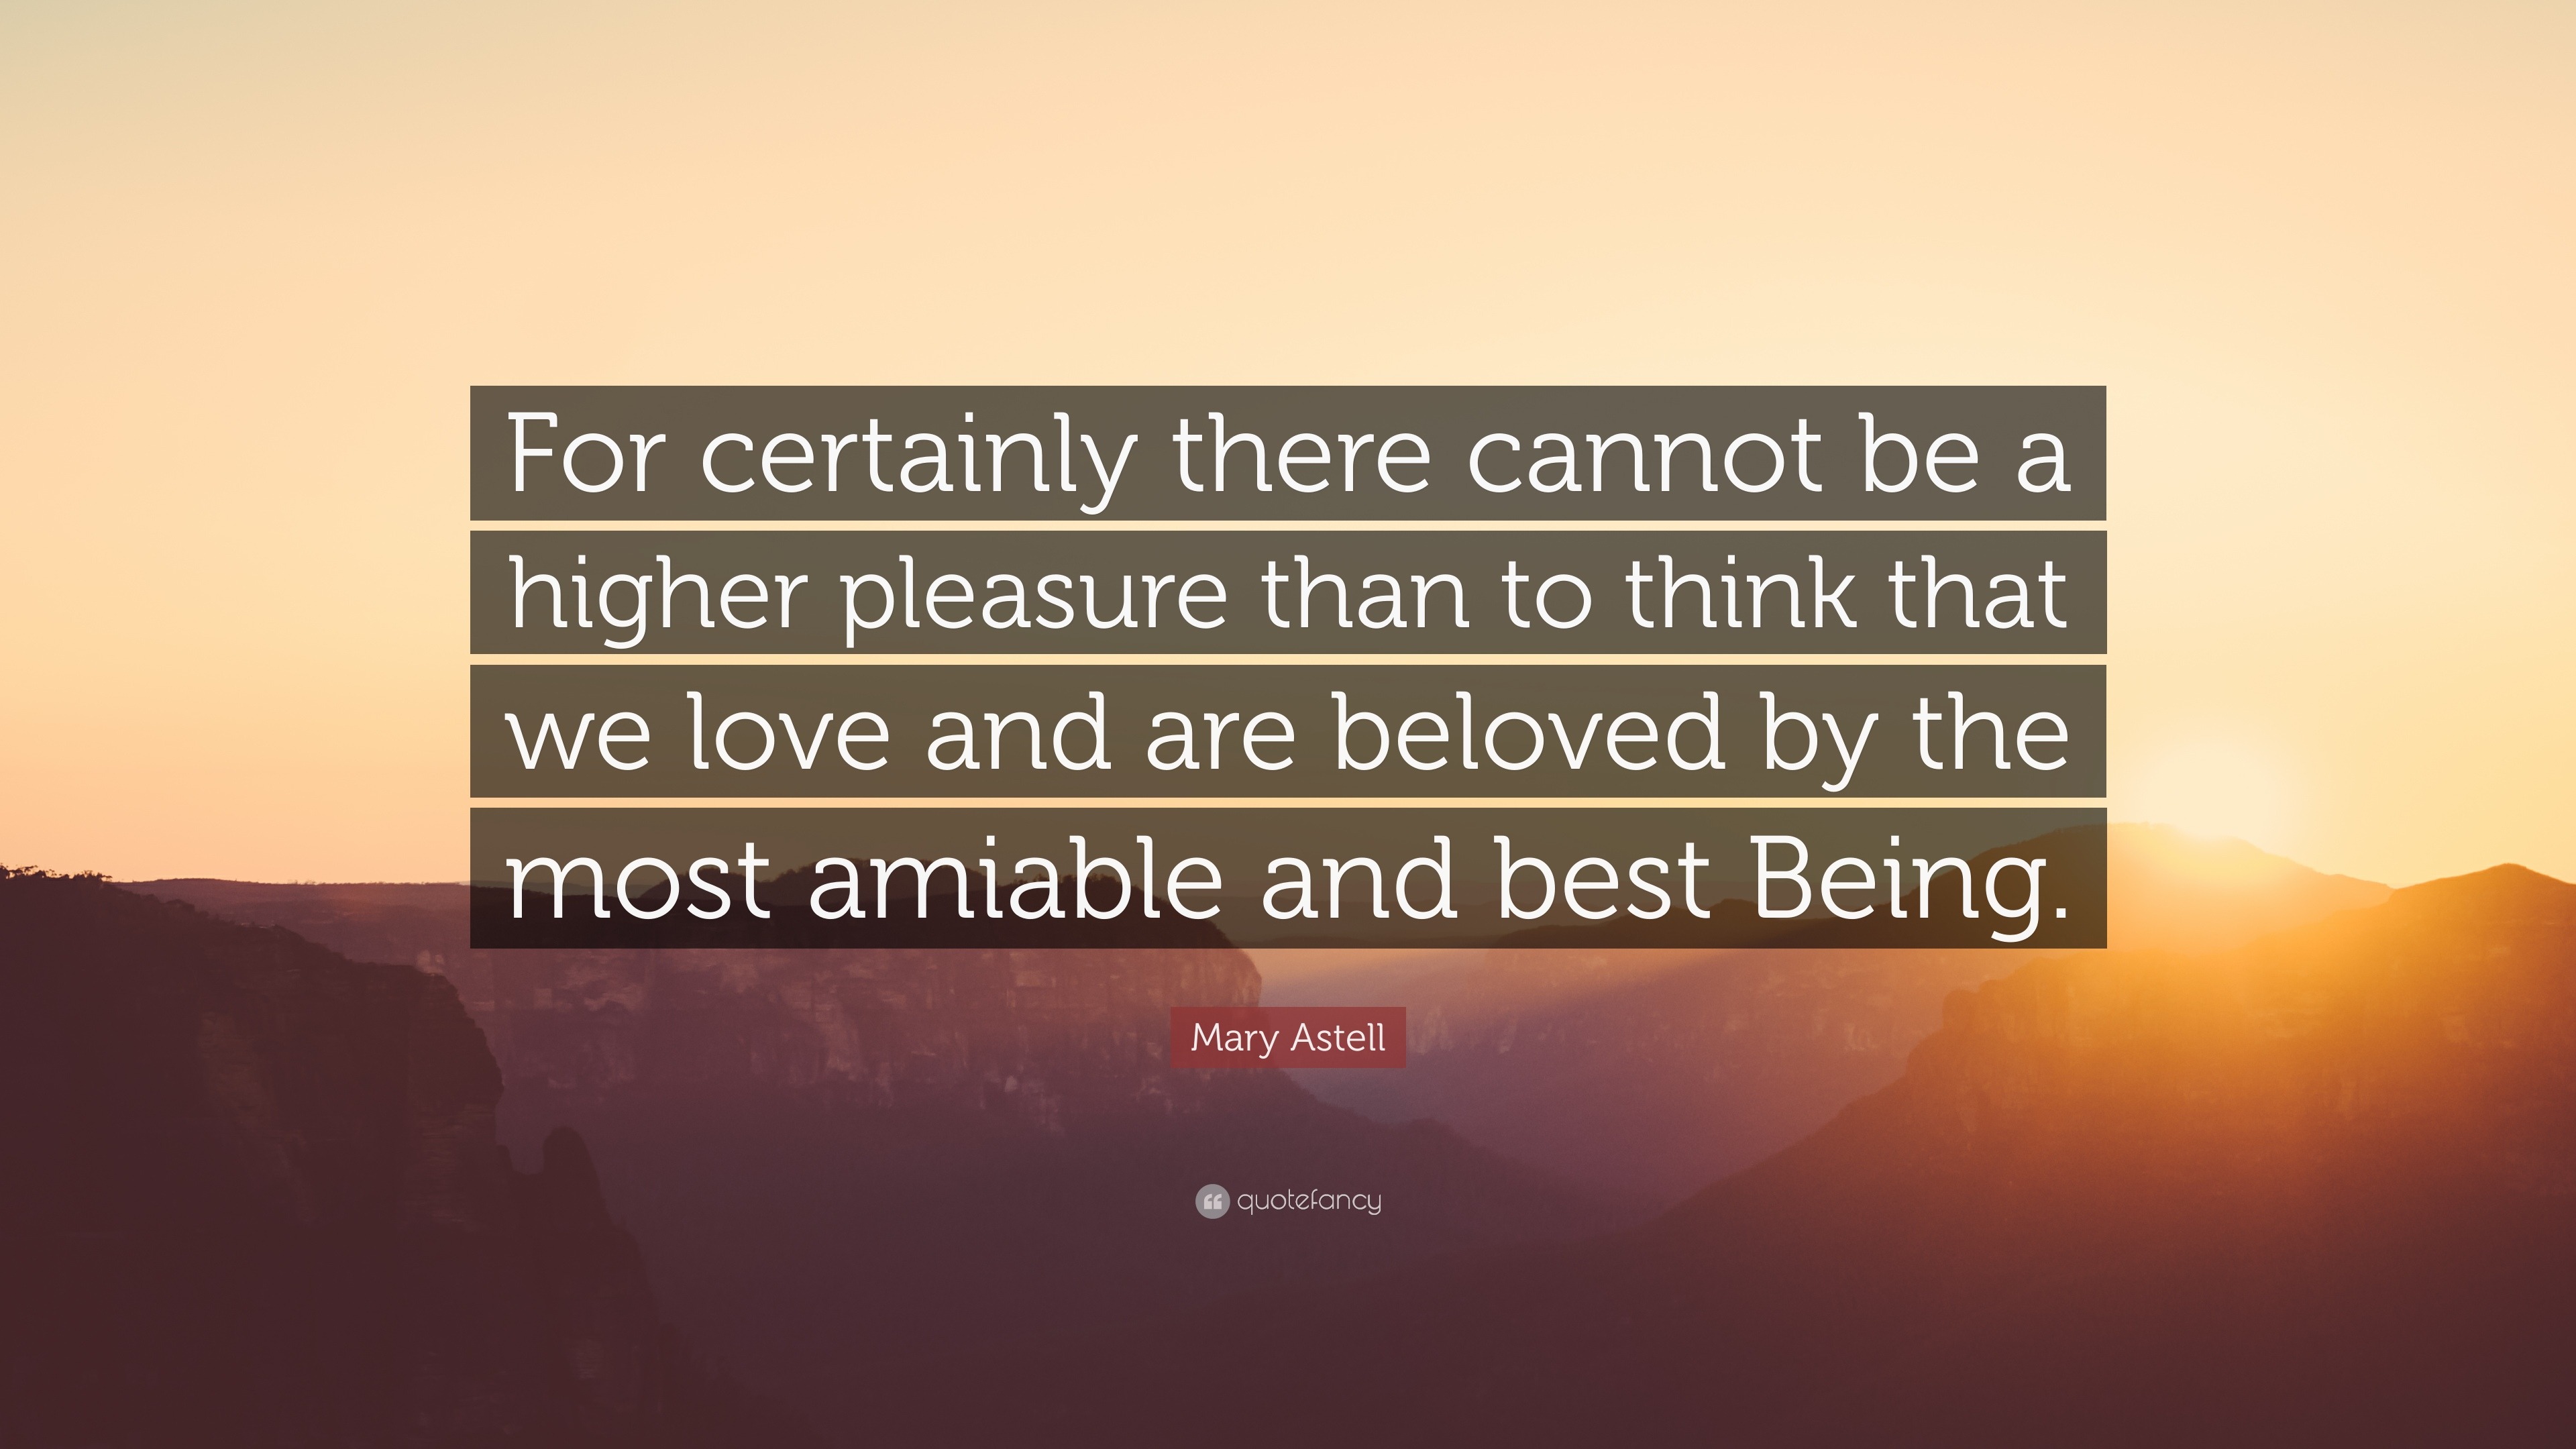 Mary Astell Quote: “For certainly there cannot be a higher pleasure ...